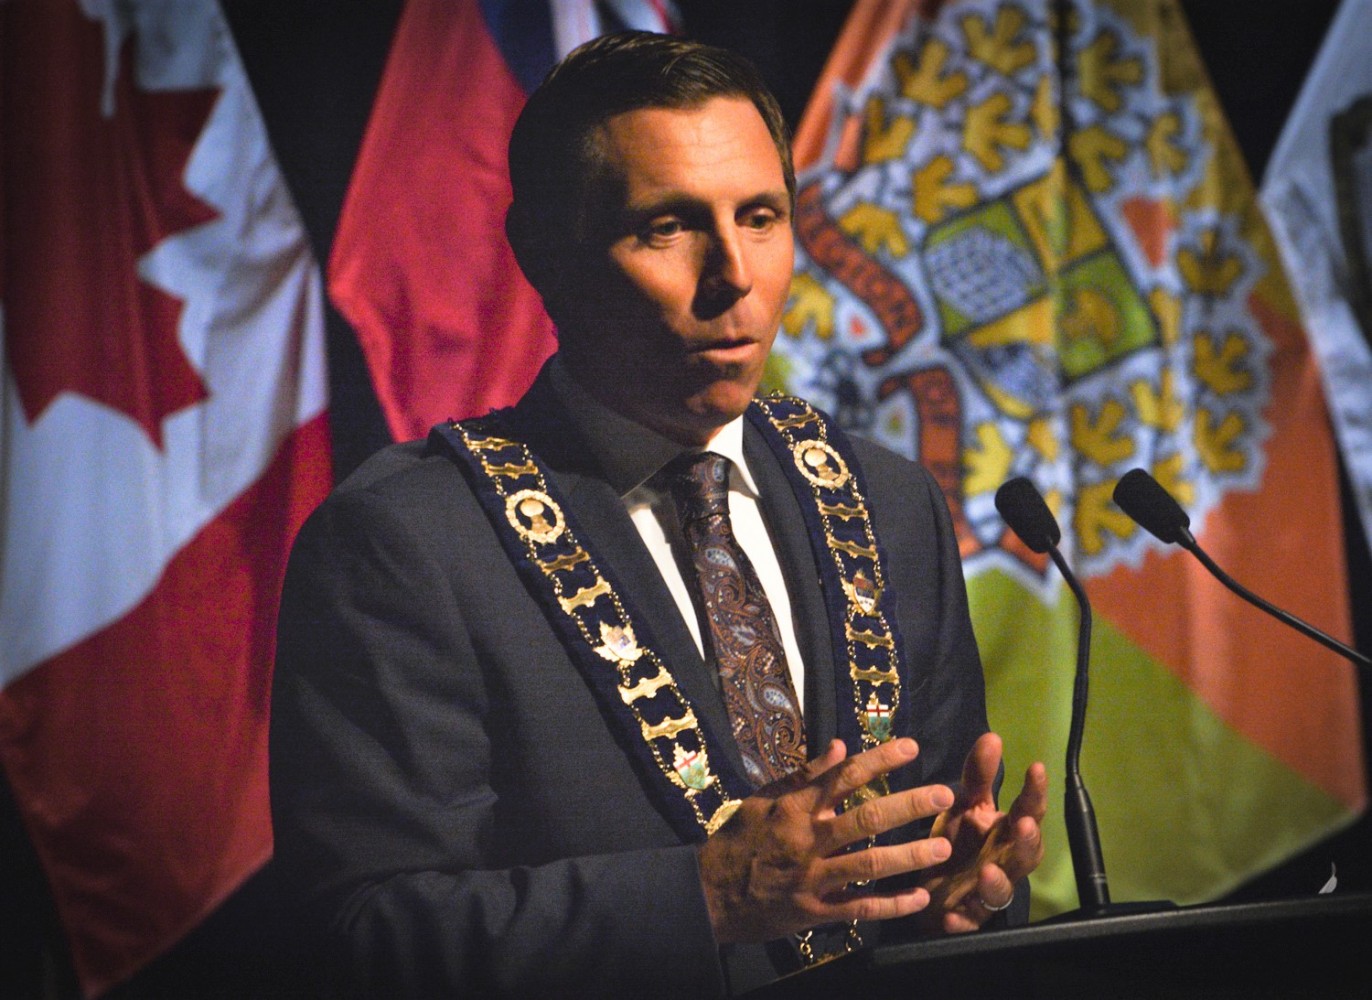 ‘Brampton businesses are losing confidence in the City's ability to plan’: Industry leaders blast Patrick Brown’s incompetent budget